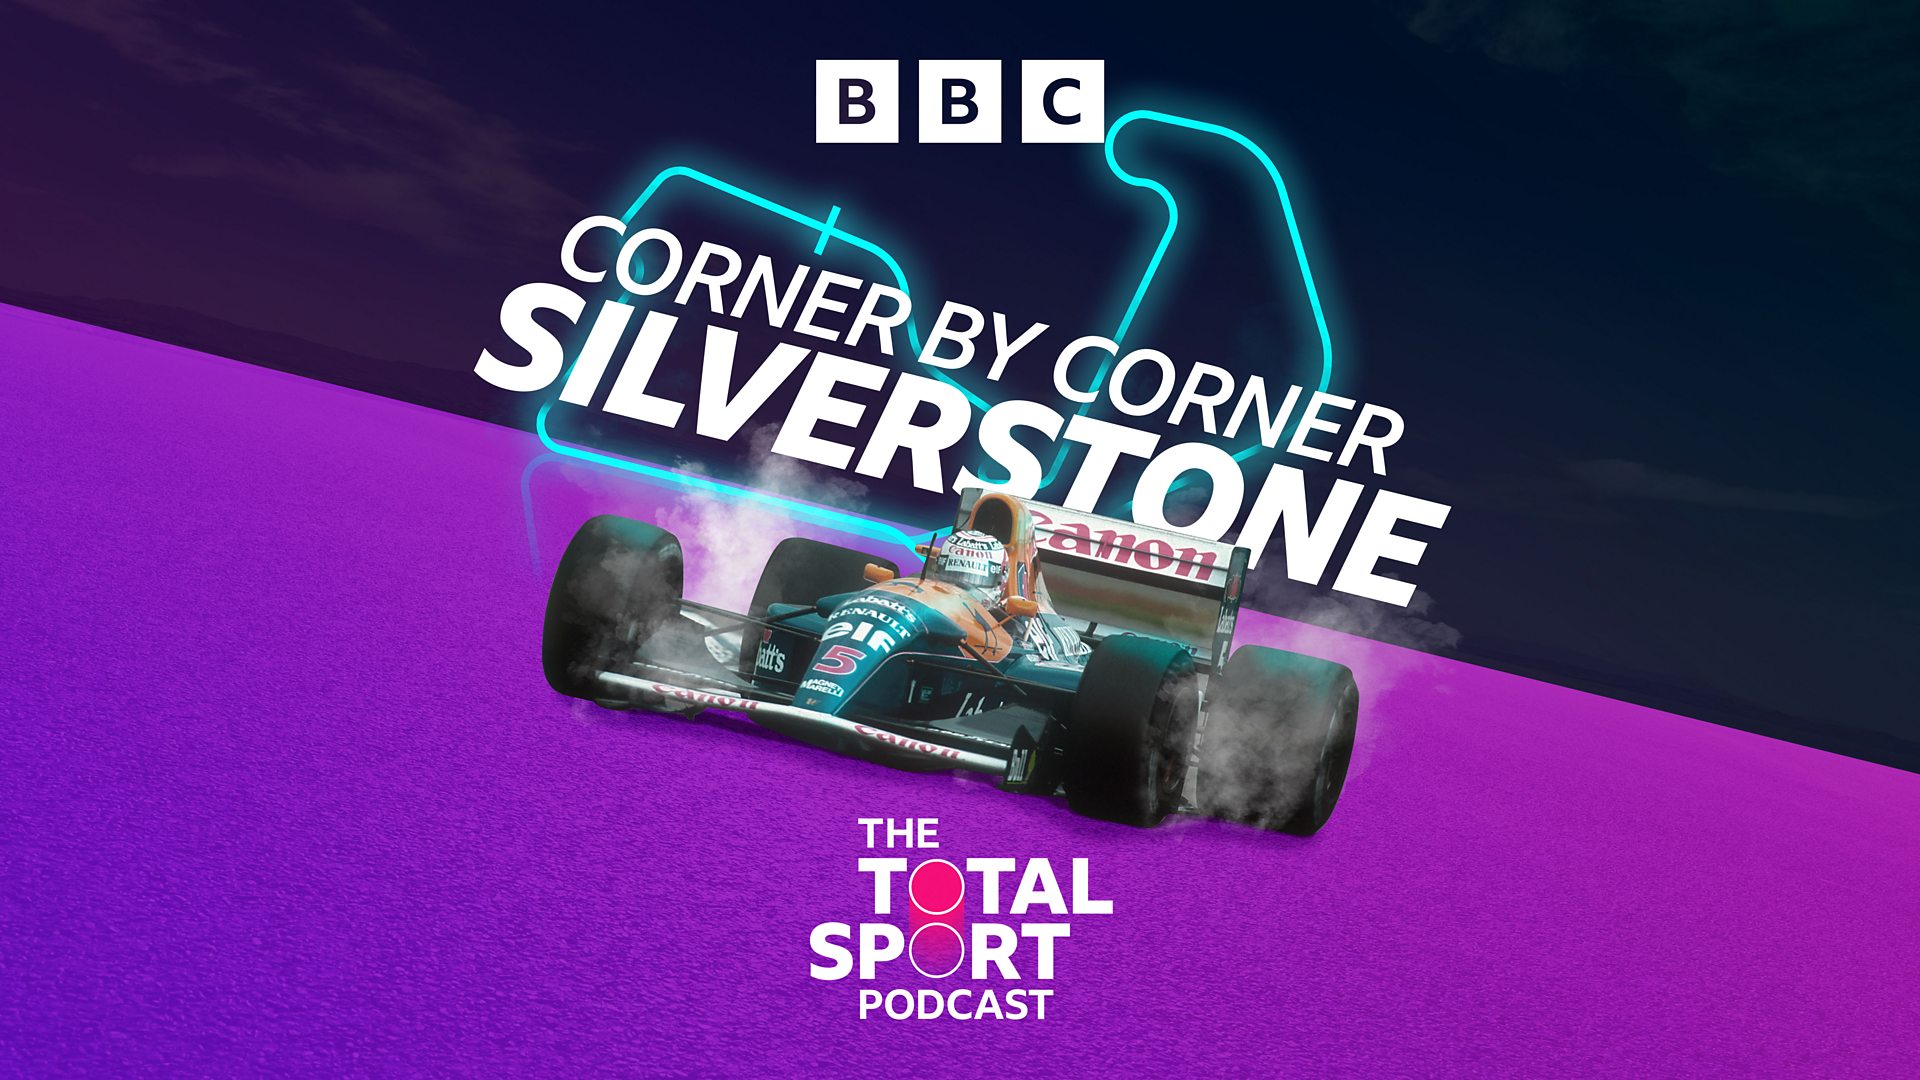 The Total Sports Podcast explores the exhilarating history of Silverstone in the new series Corner by Corner Silverstone